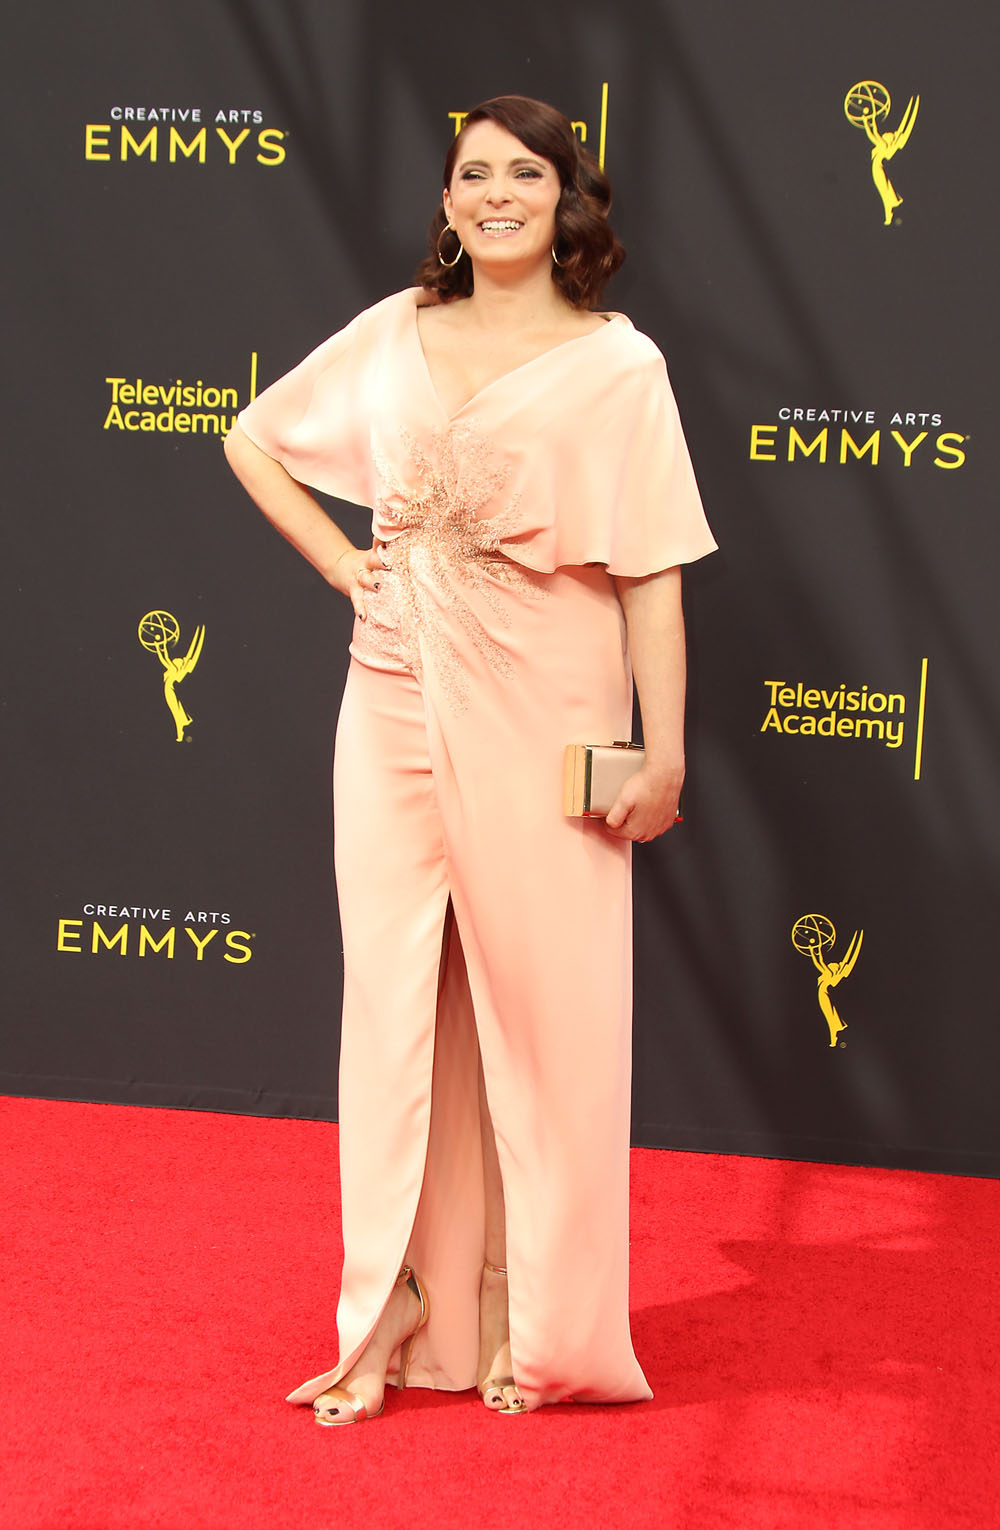 Creative Arts Emmy 2019 - Day 1 Arrivals